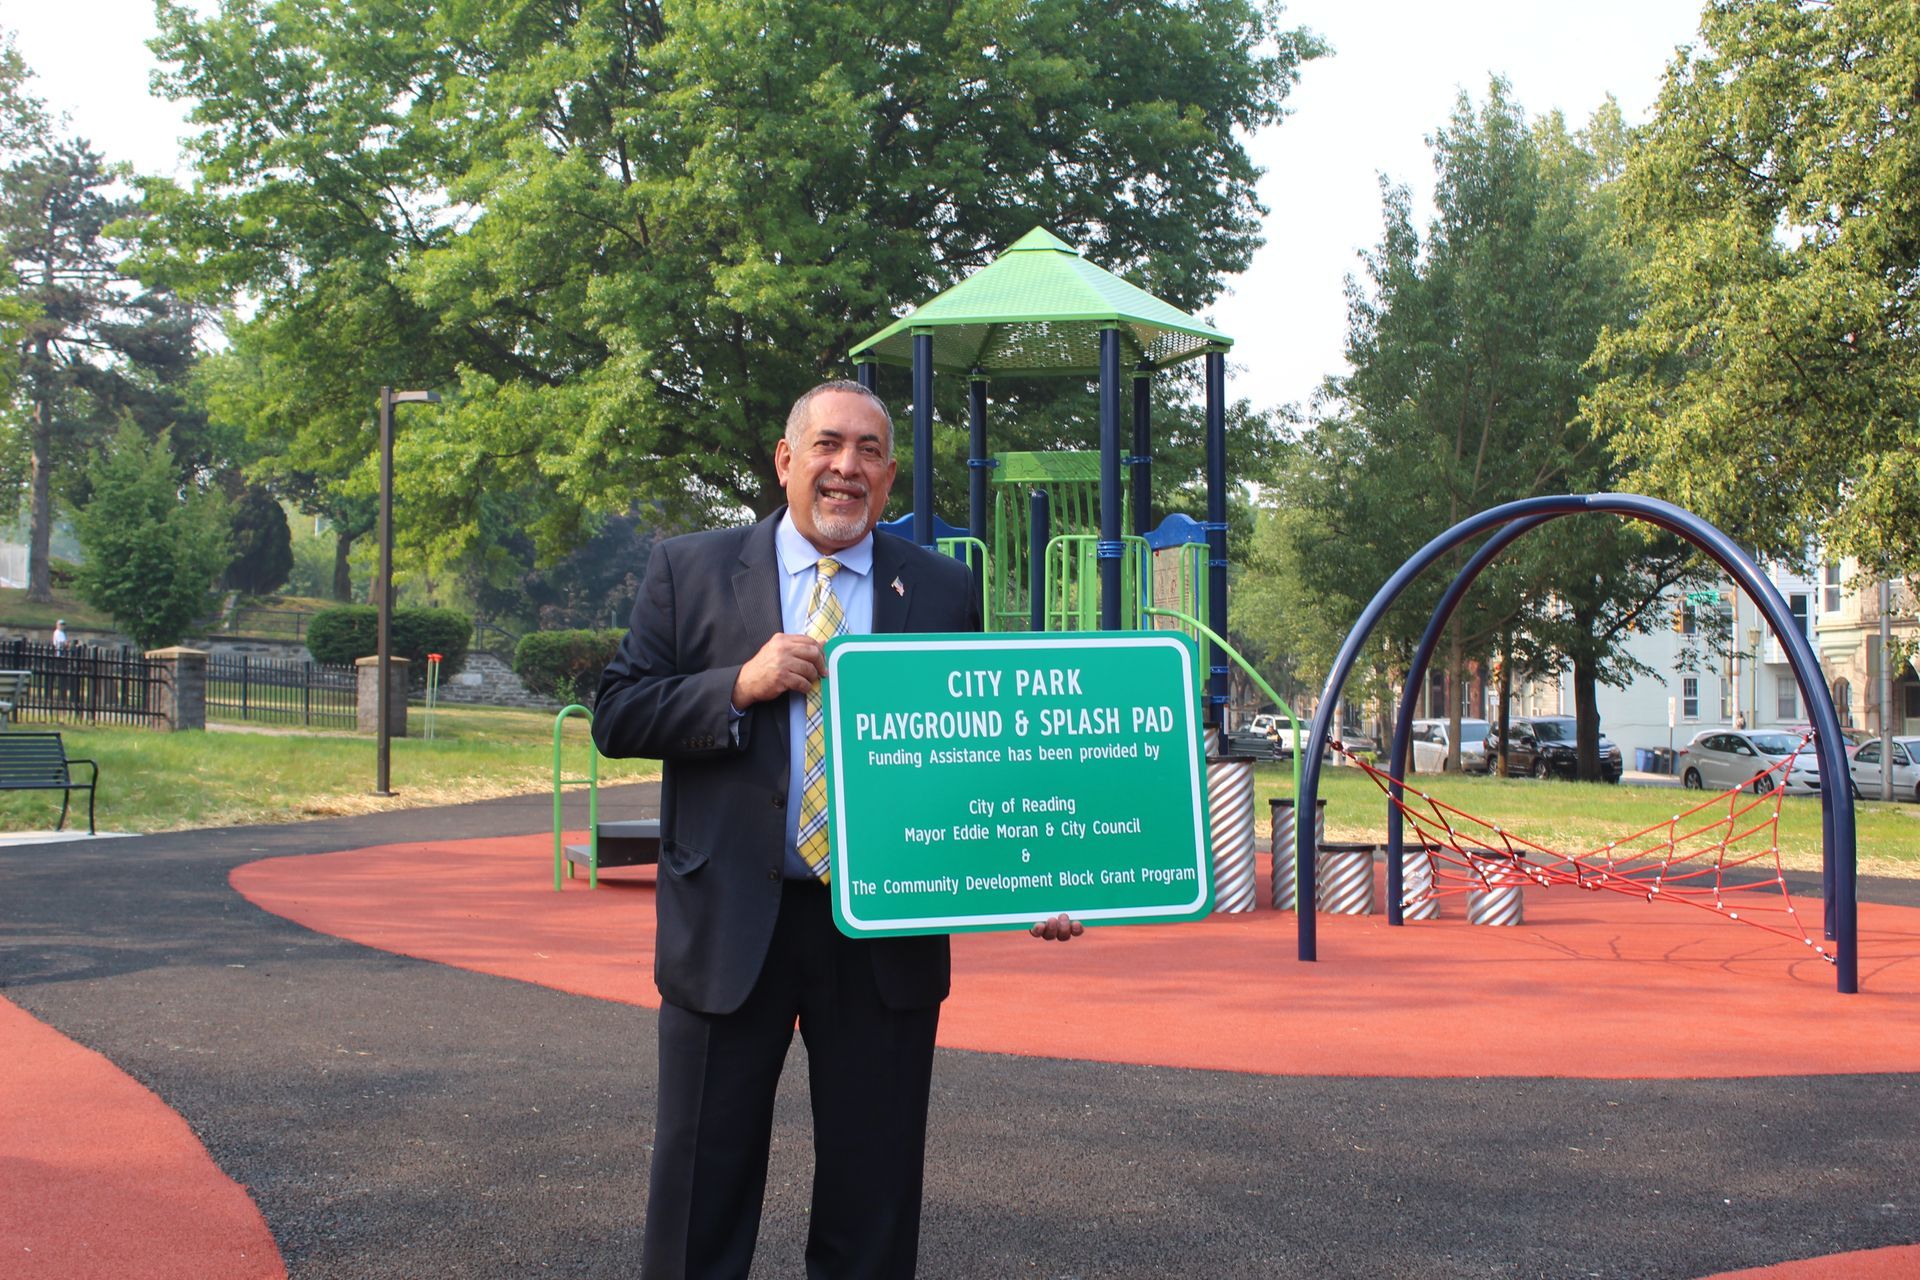 A man in a suit and tie is holding a sign in front of a playground.